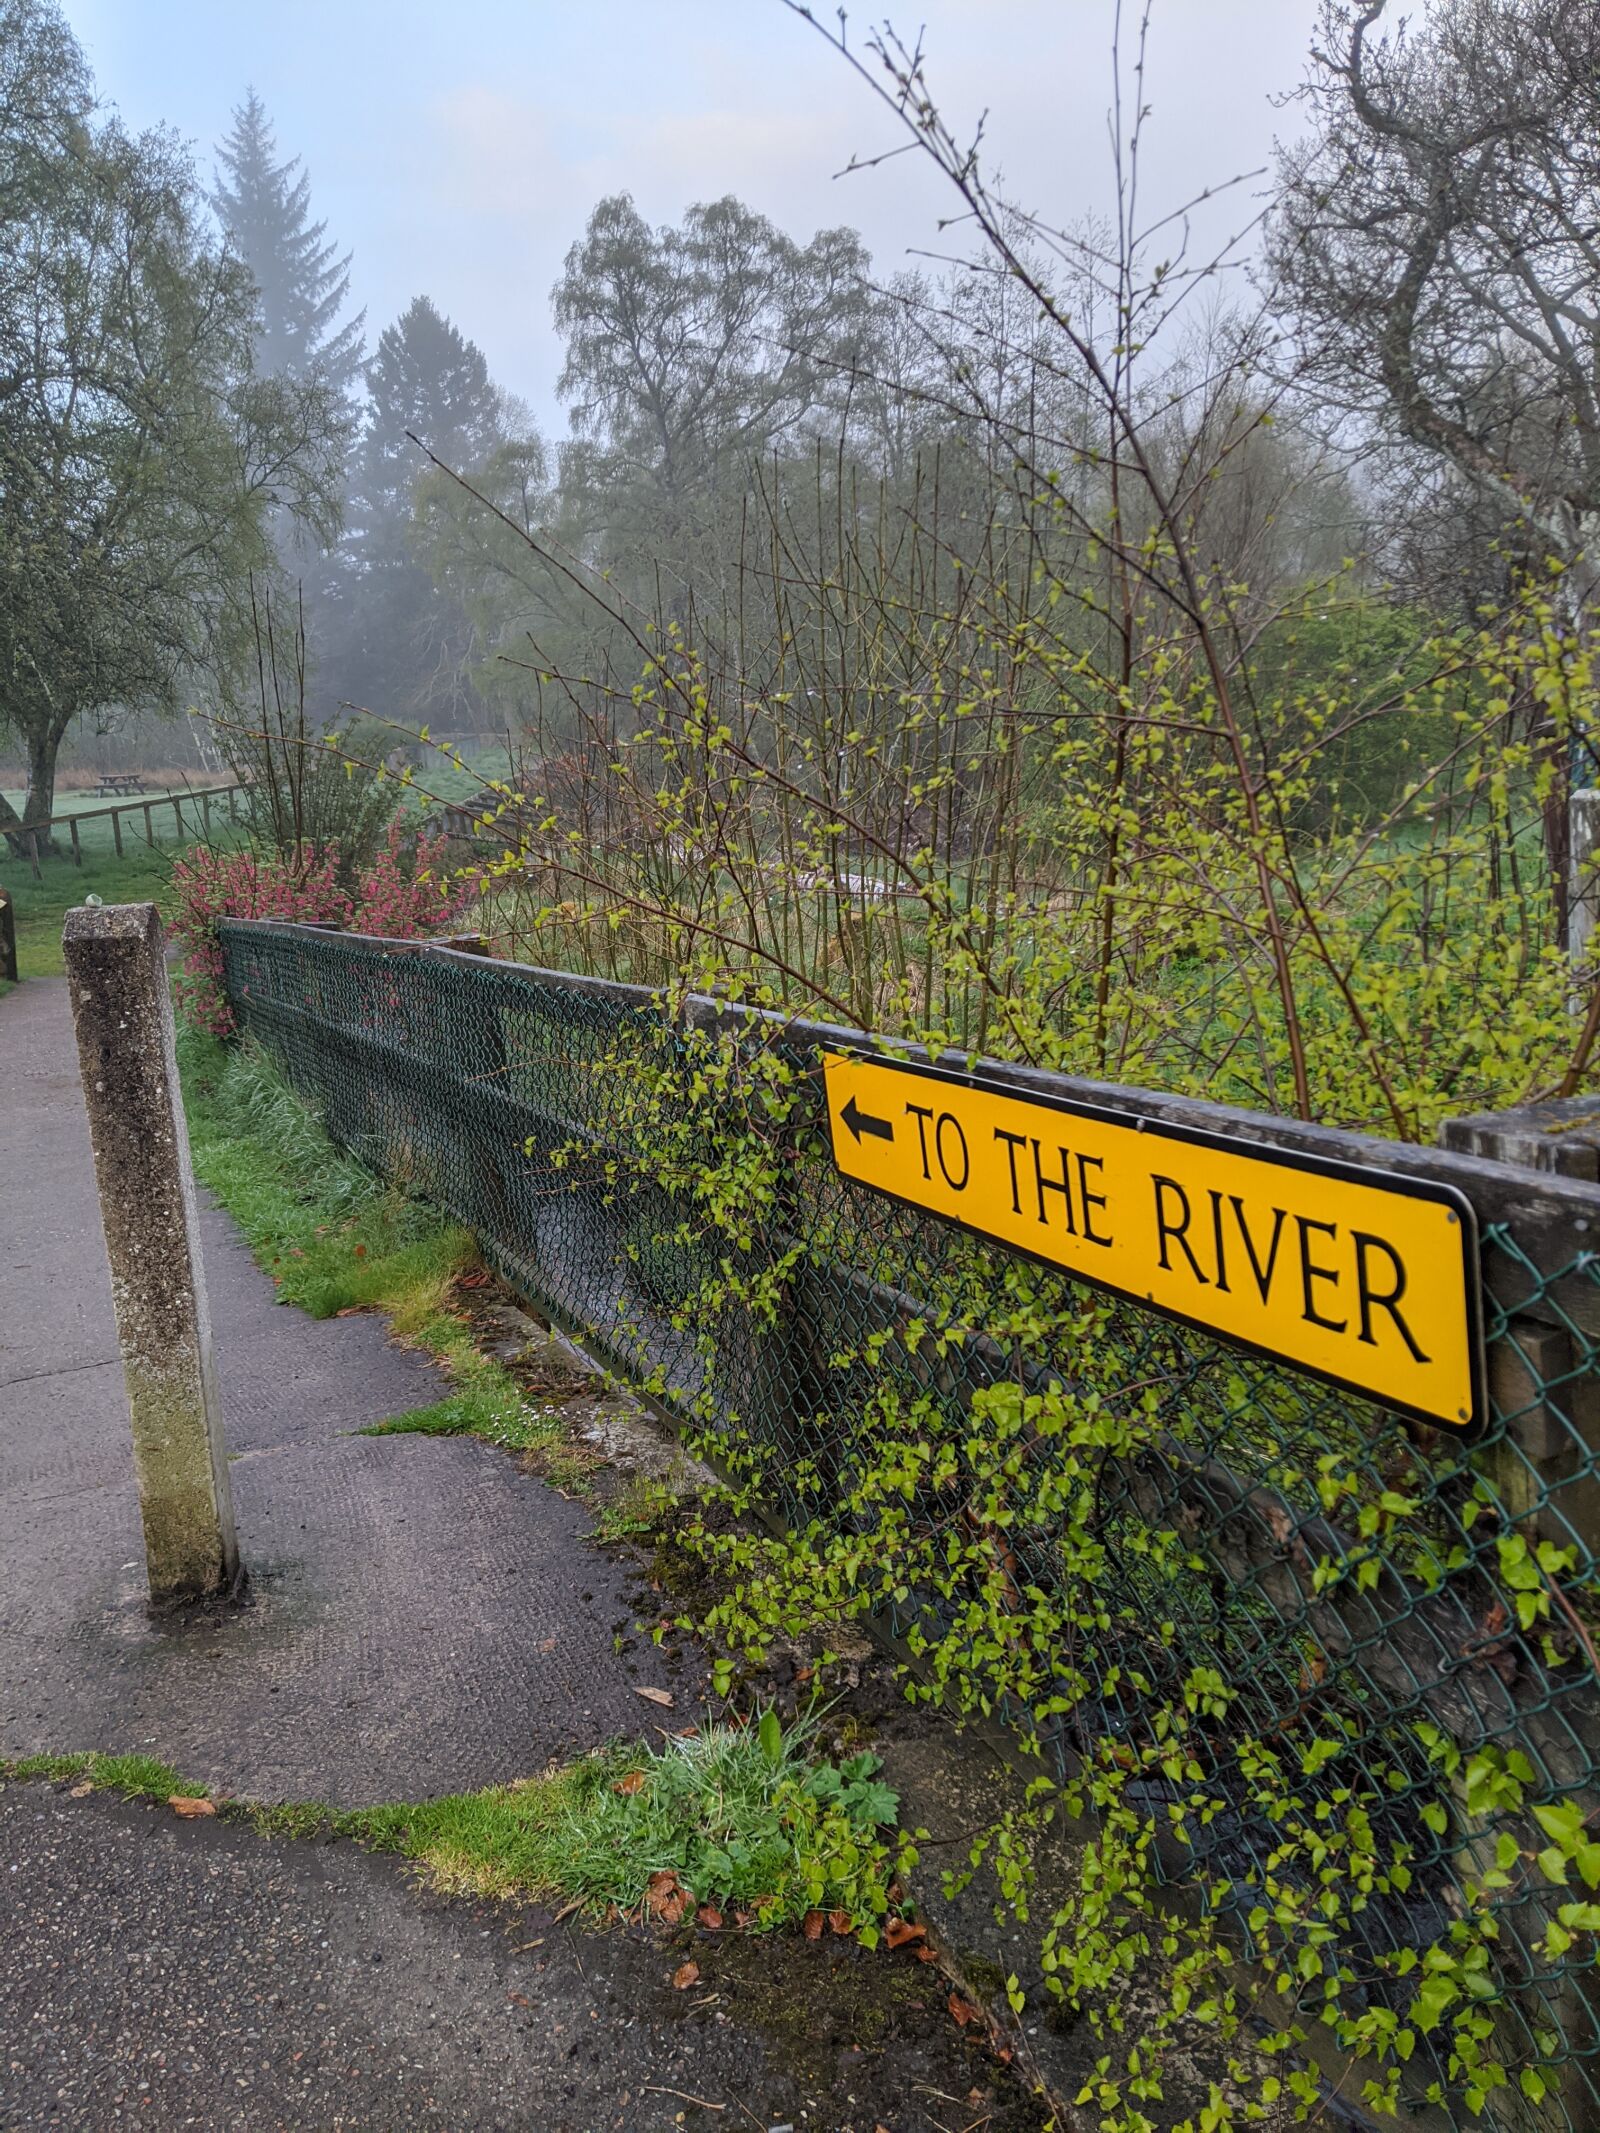 Google Pixel 3 sample photo. To the river, sign photography